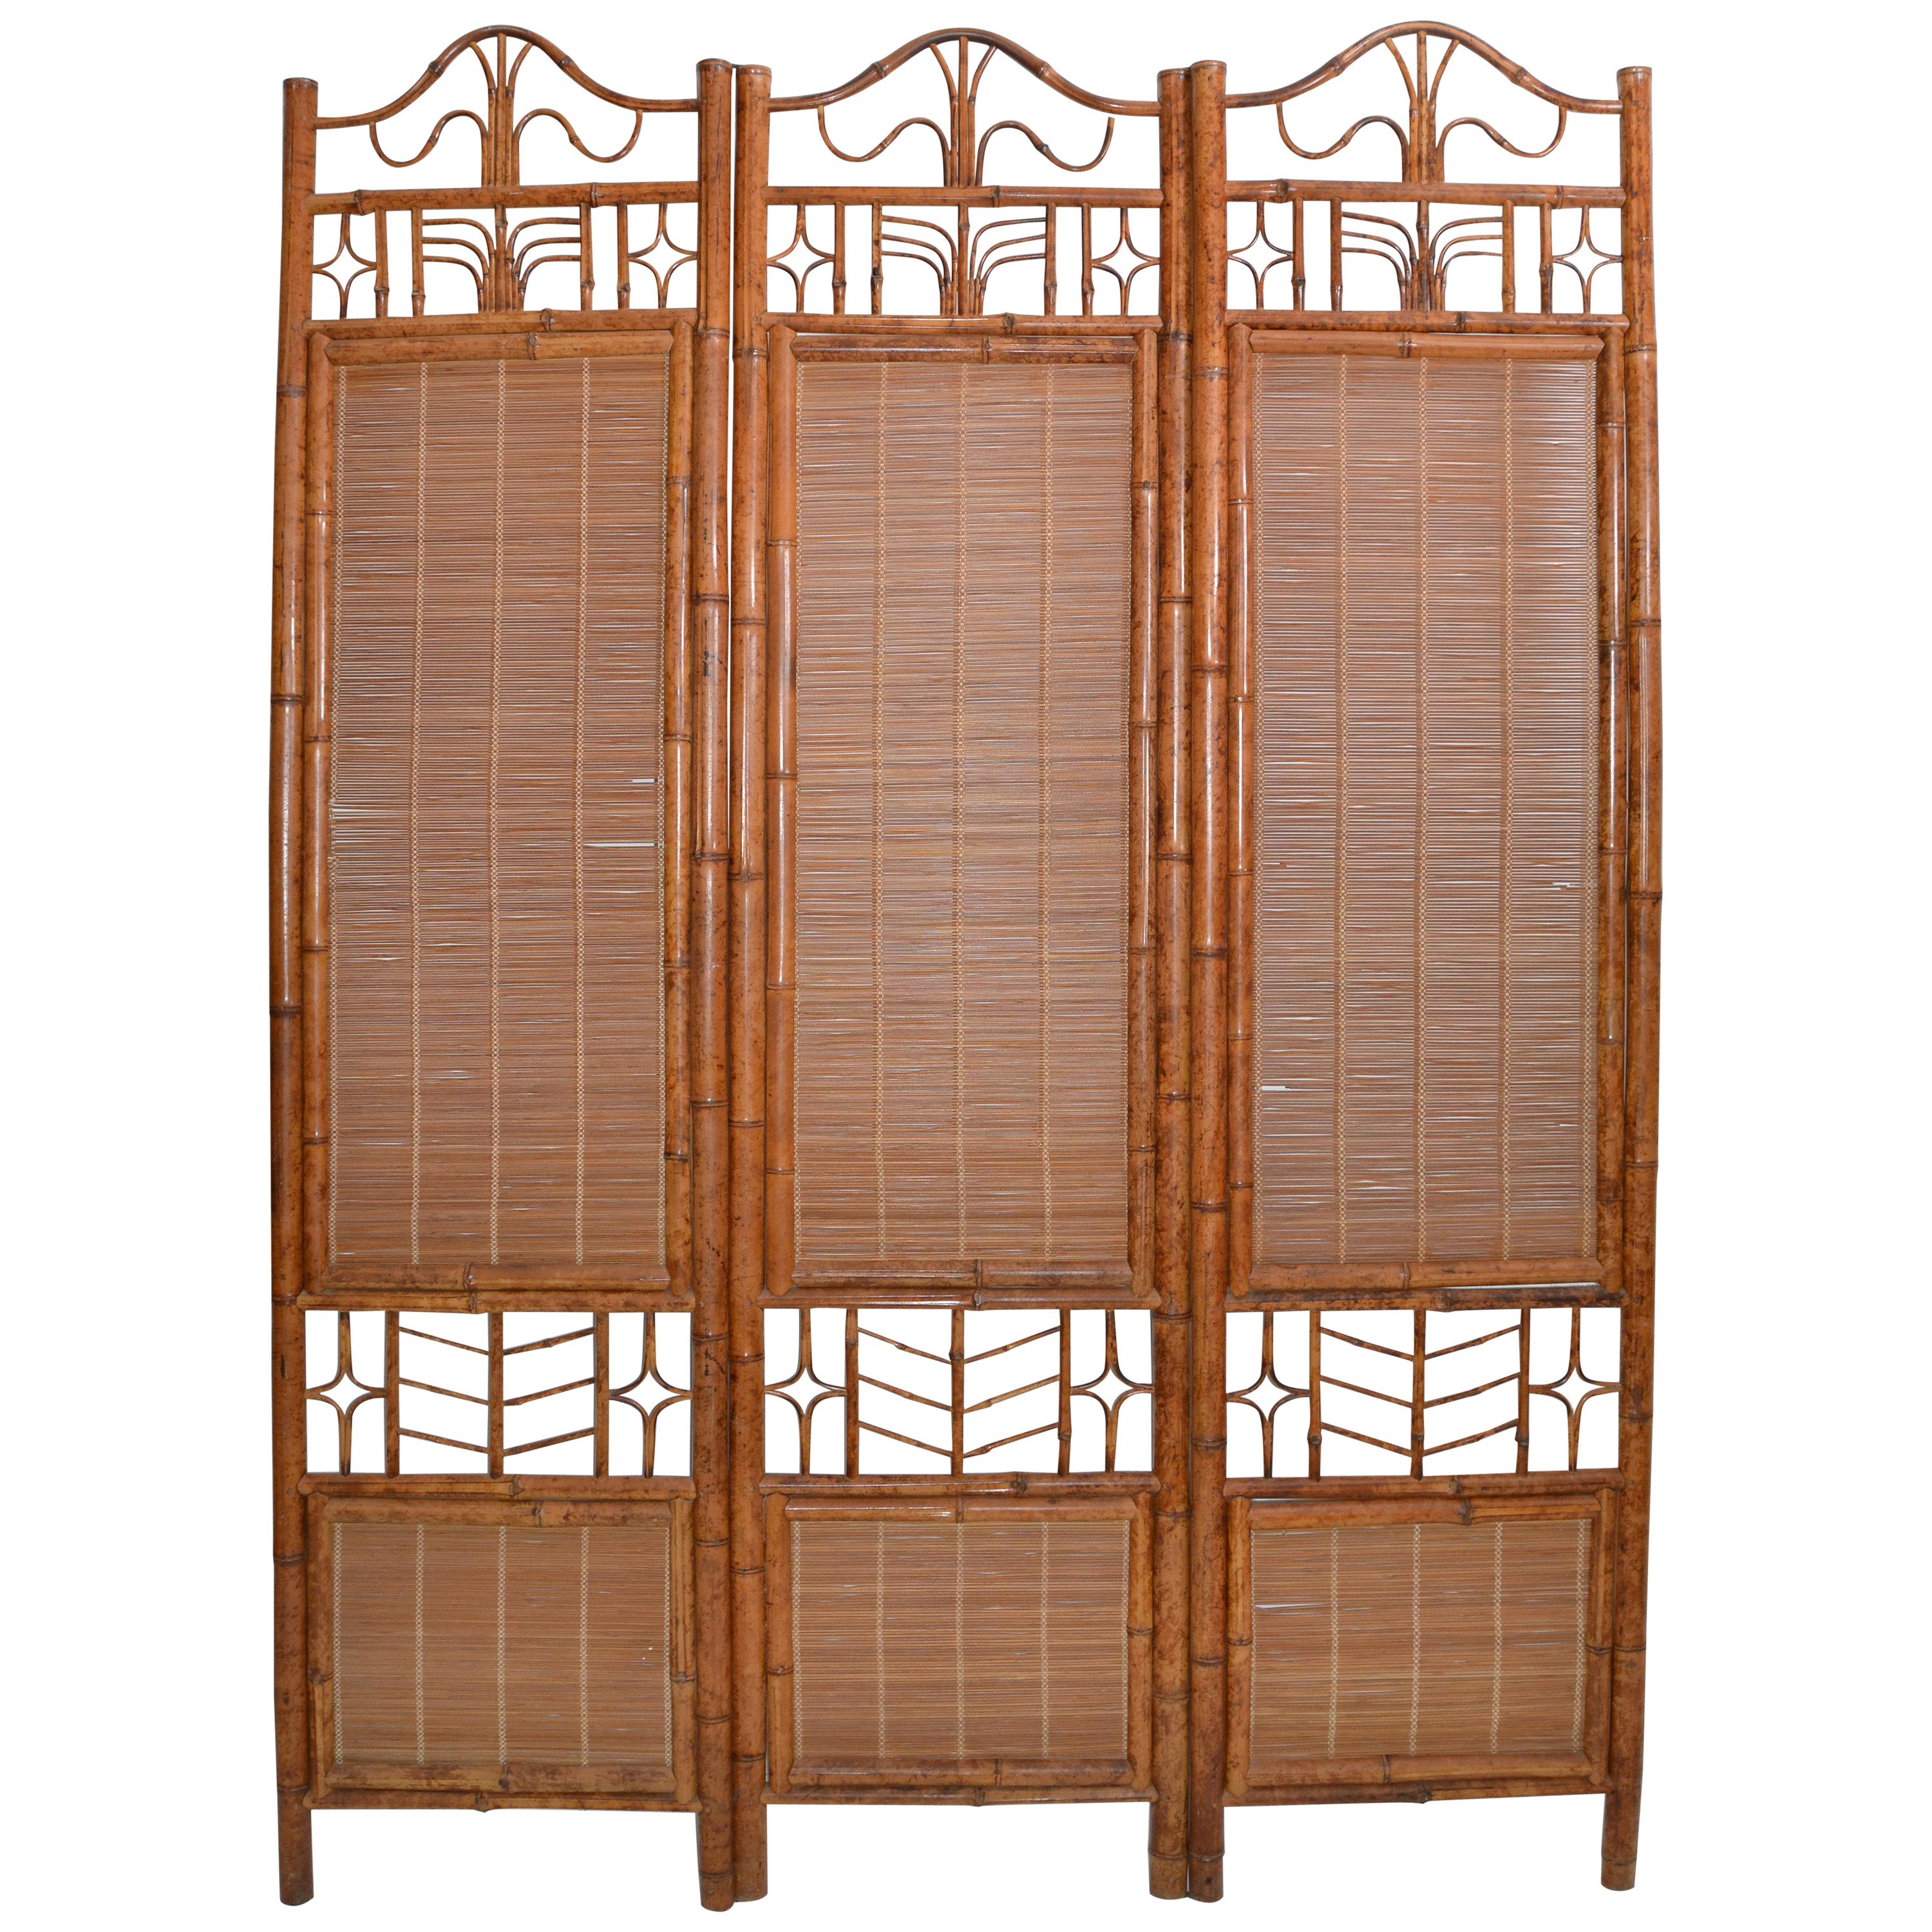 One Mid-Century Modern Tall Solid Bamboo Wood Room Divider Screen Partition For Sale